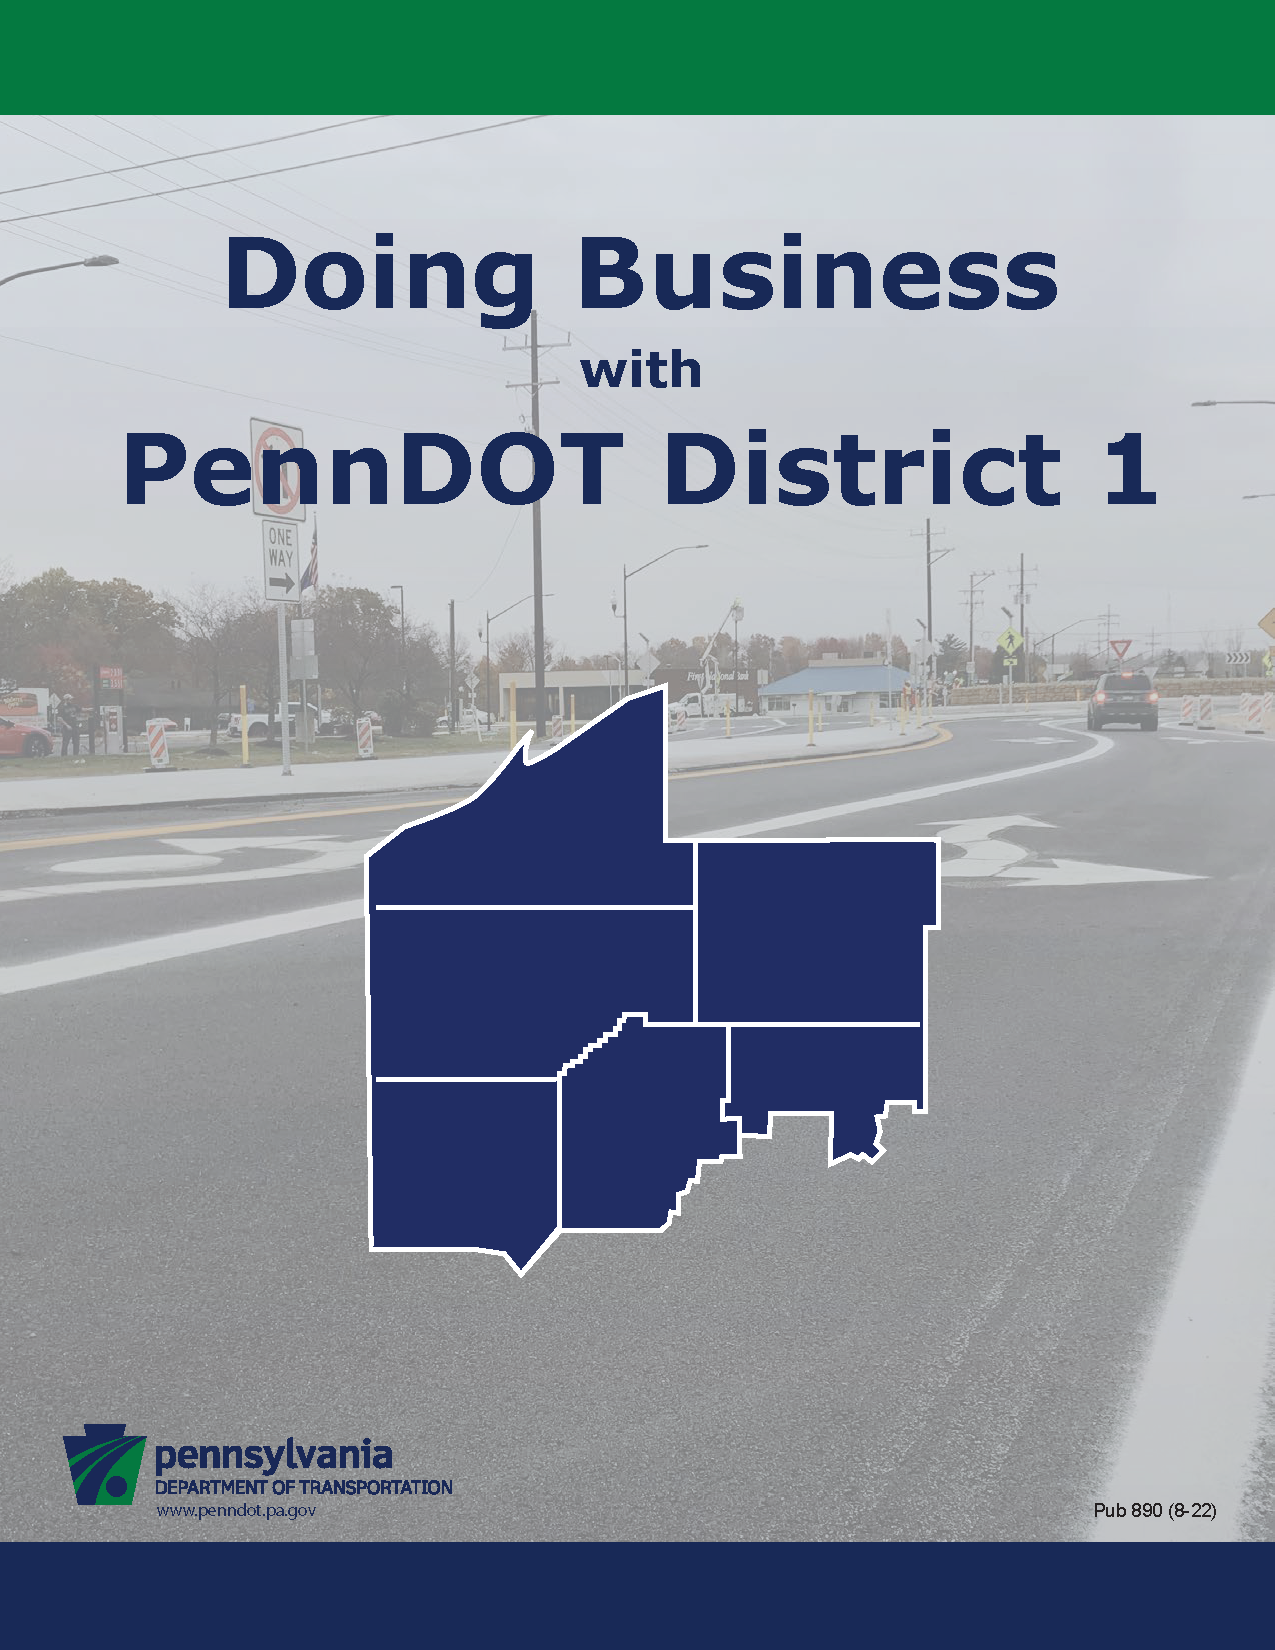 Doing Business with PennDOT_Picture.PNG